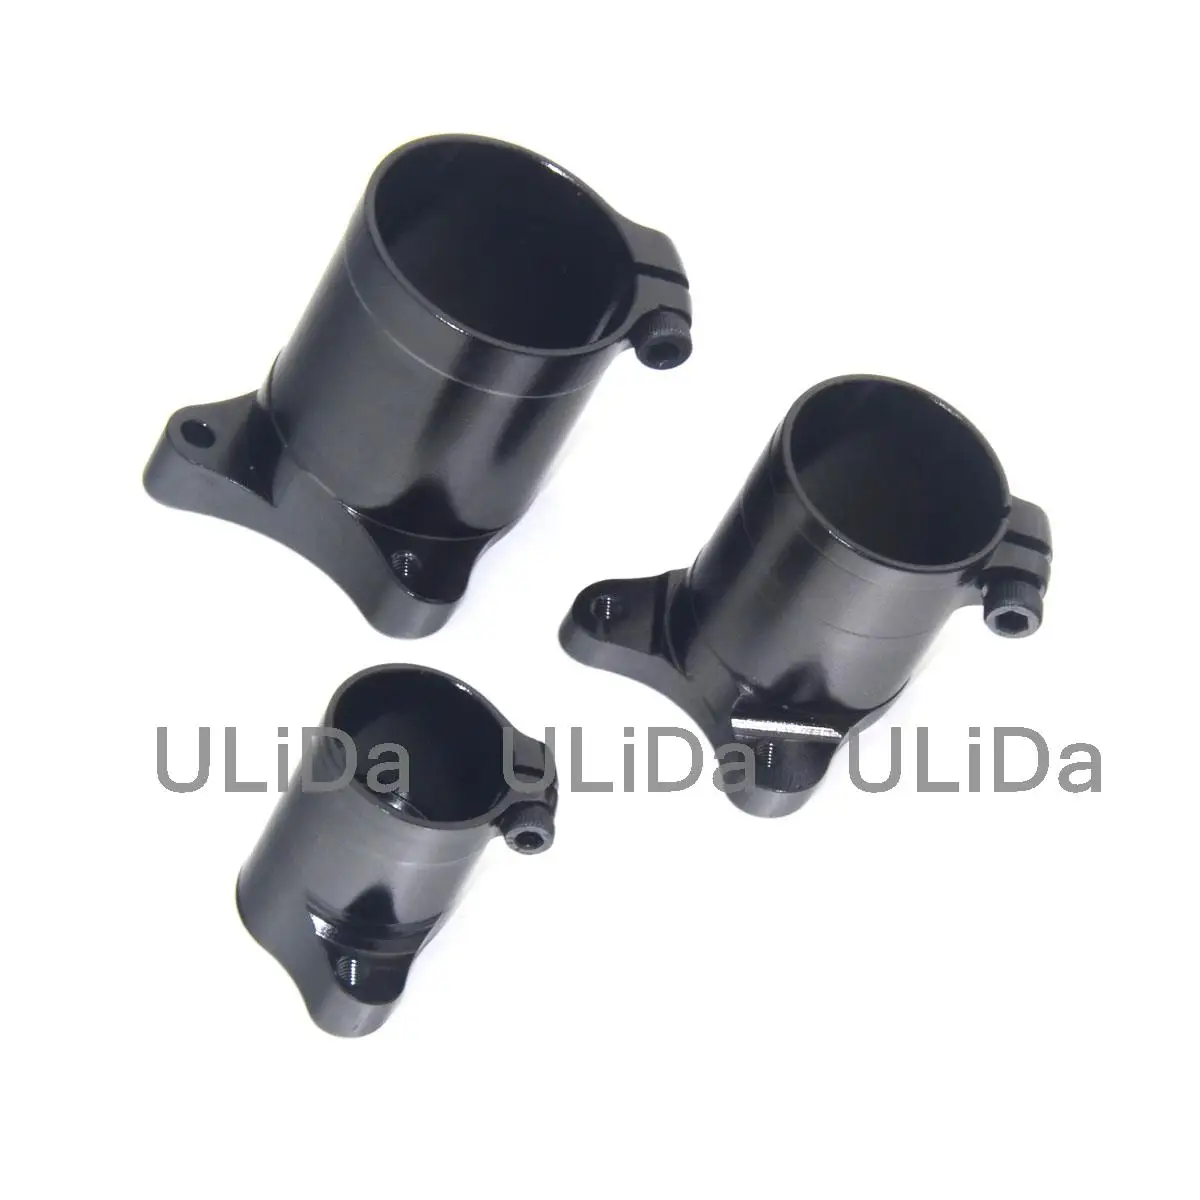 

16 20 25mm Aluminum Tripod Mount Carbon Pipe Connector 20 Degree Landing Gear Fixing Seat for RC Plant Agriculture UAV Drone